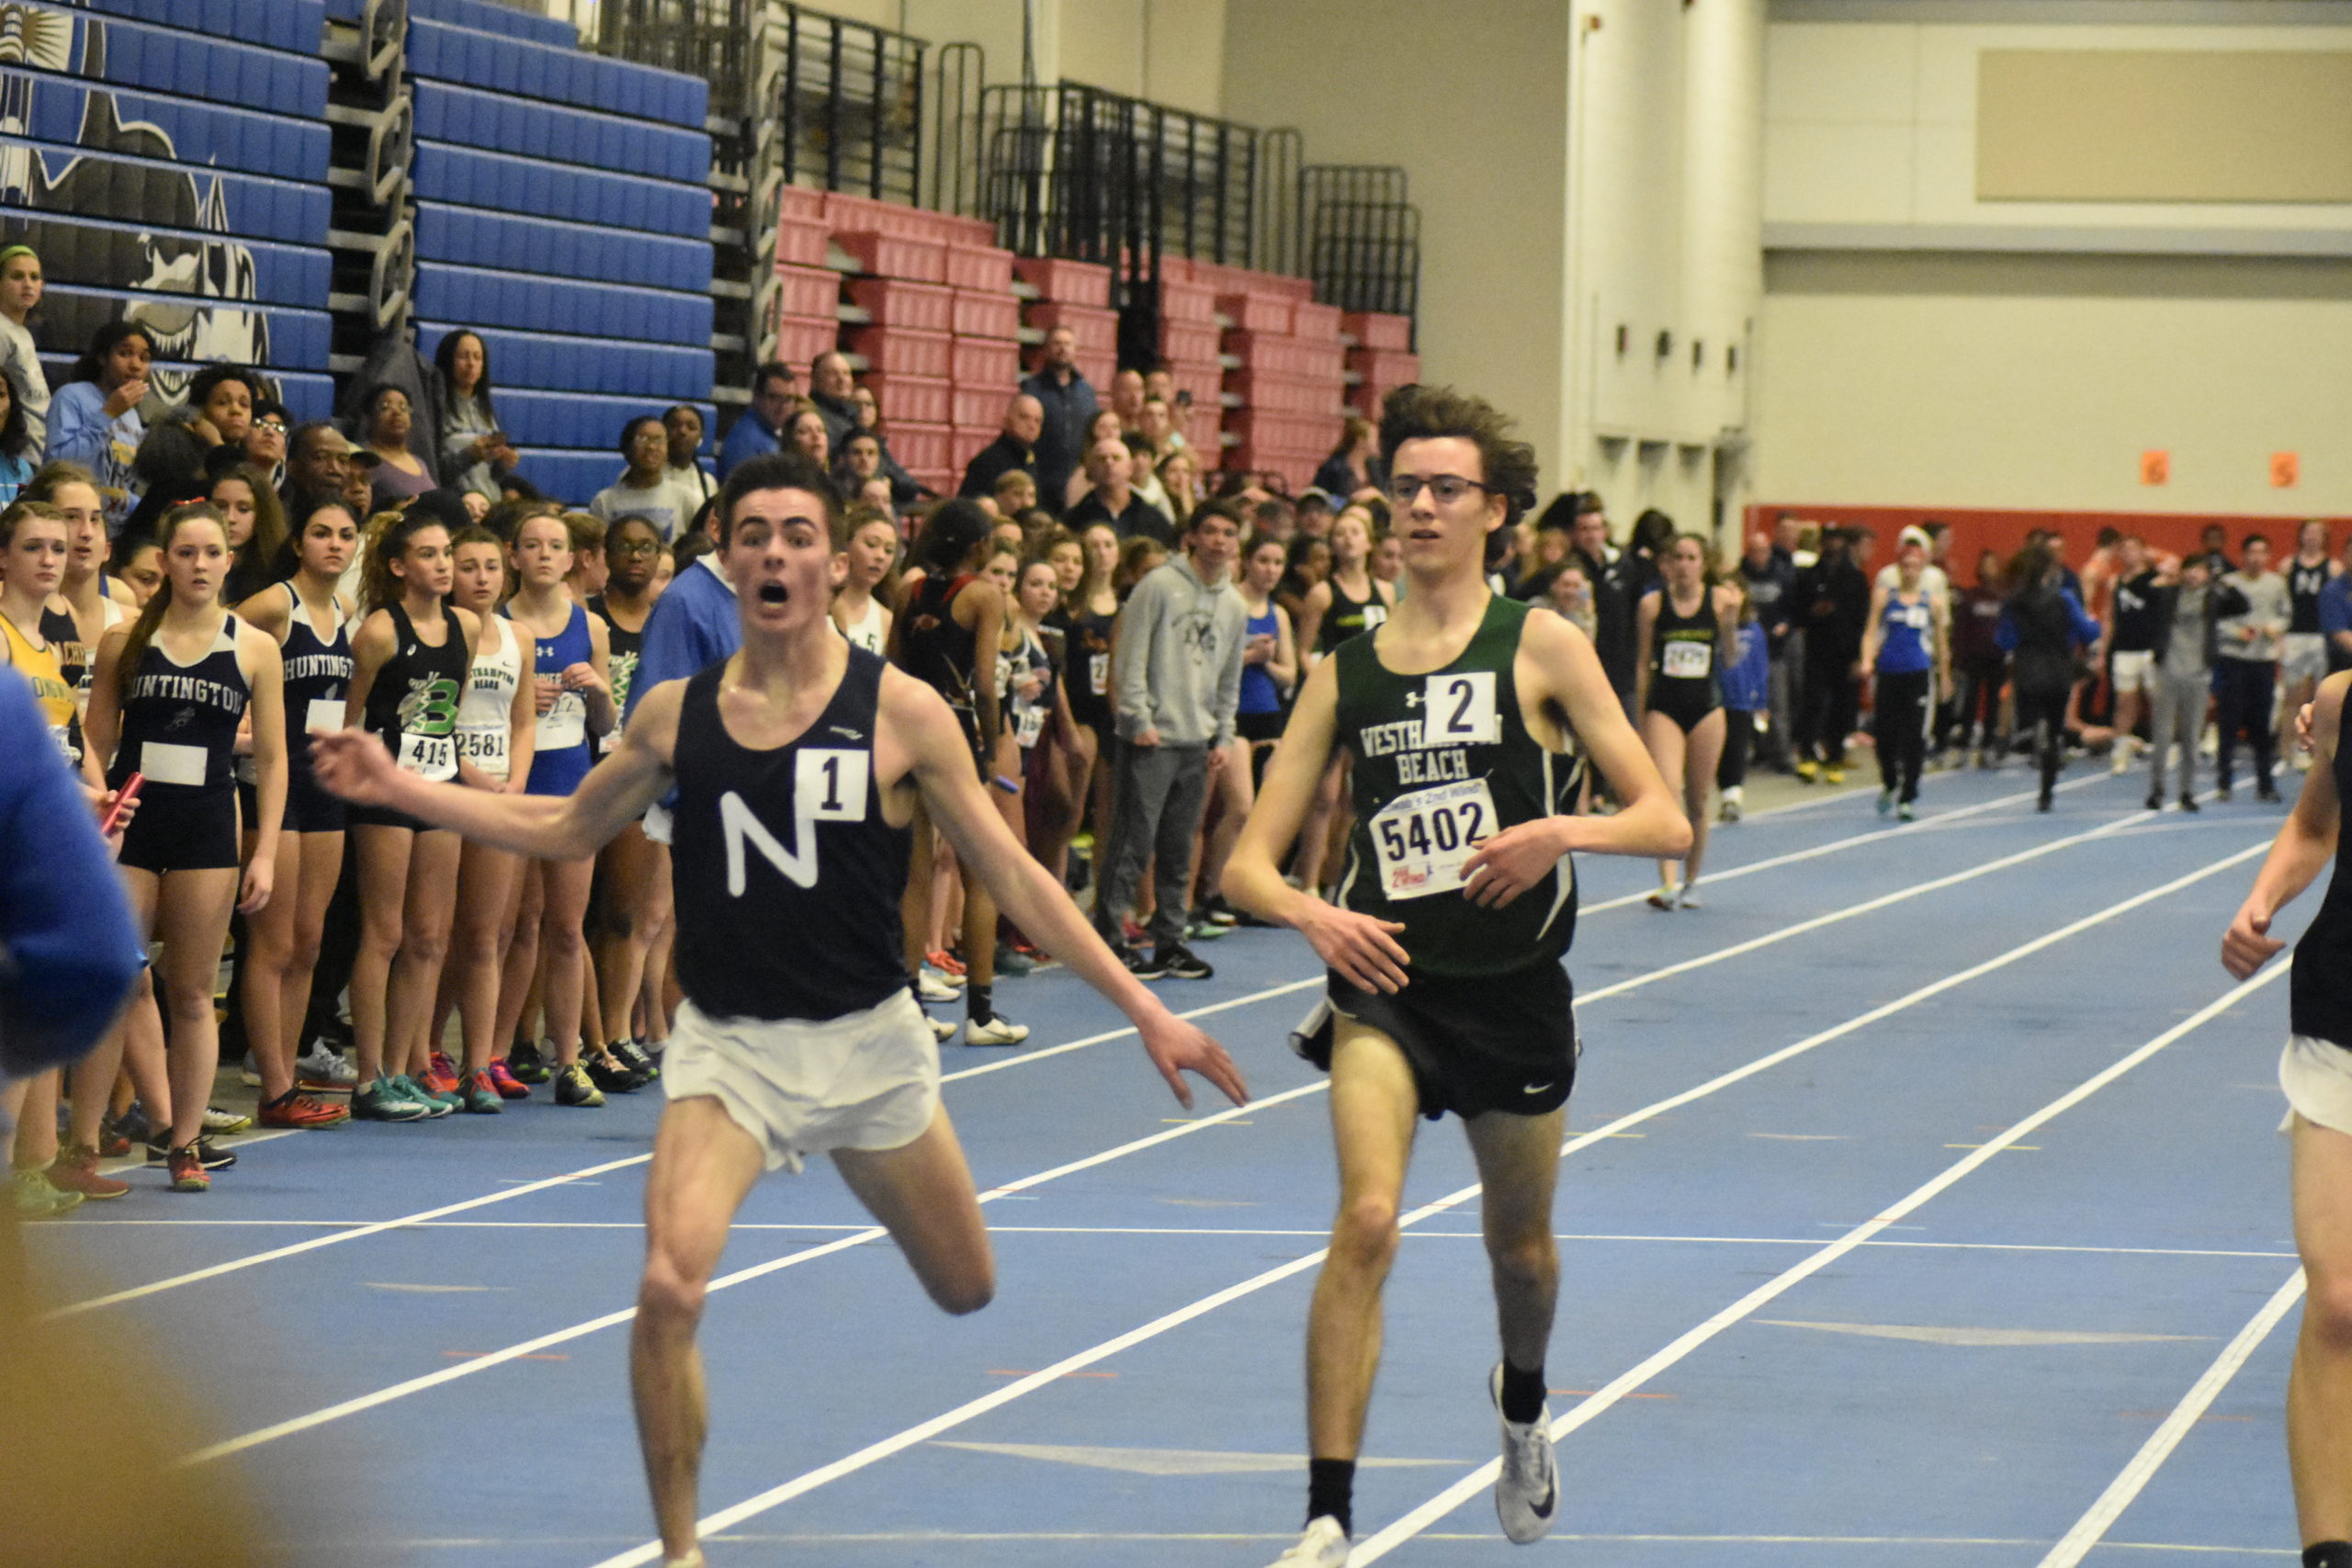 Northport senior Thomas Fodor edged Westhampton Beach sophomore Gavin Ehlers for first place in the 3,200-meter race.